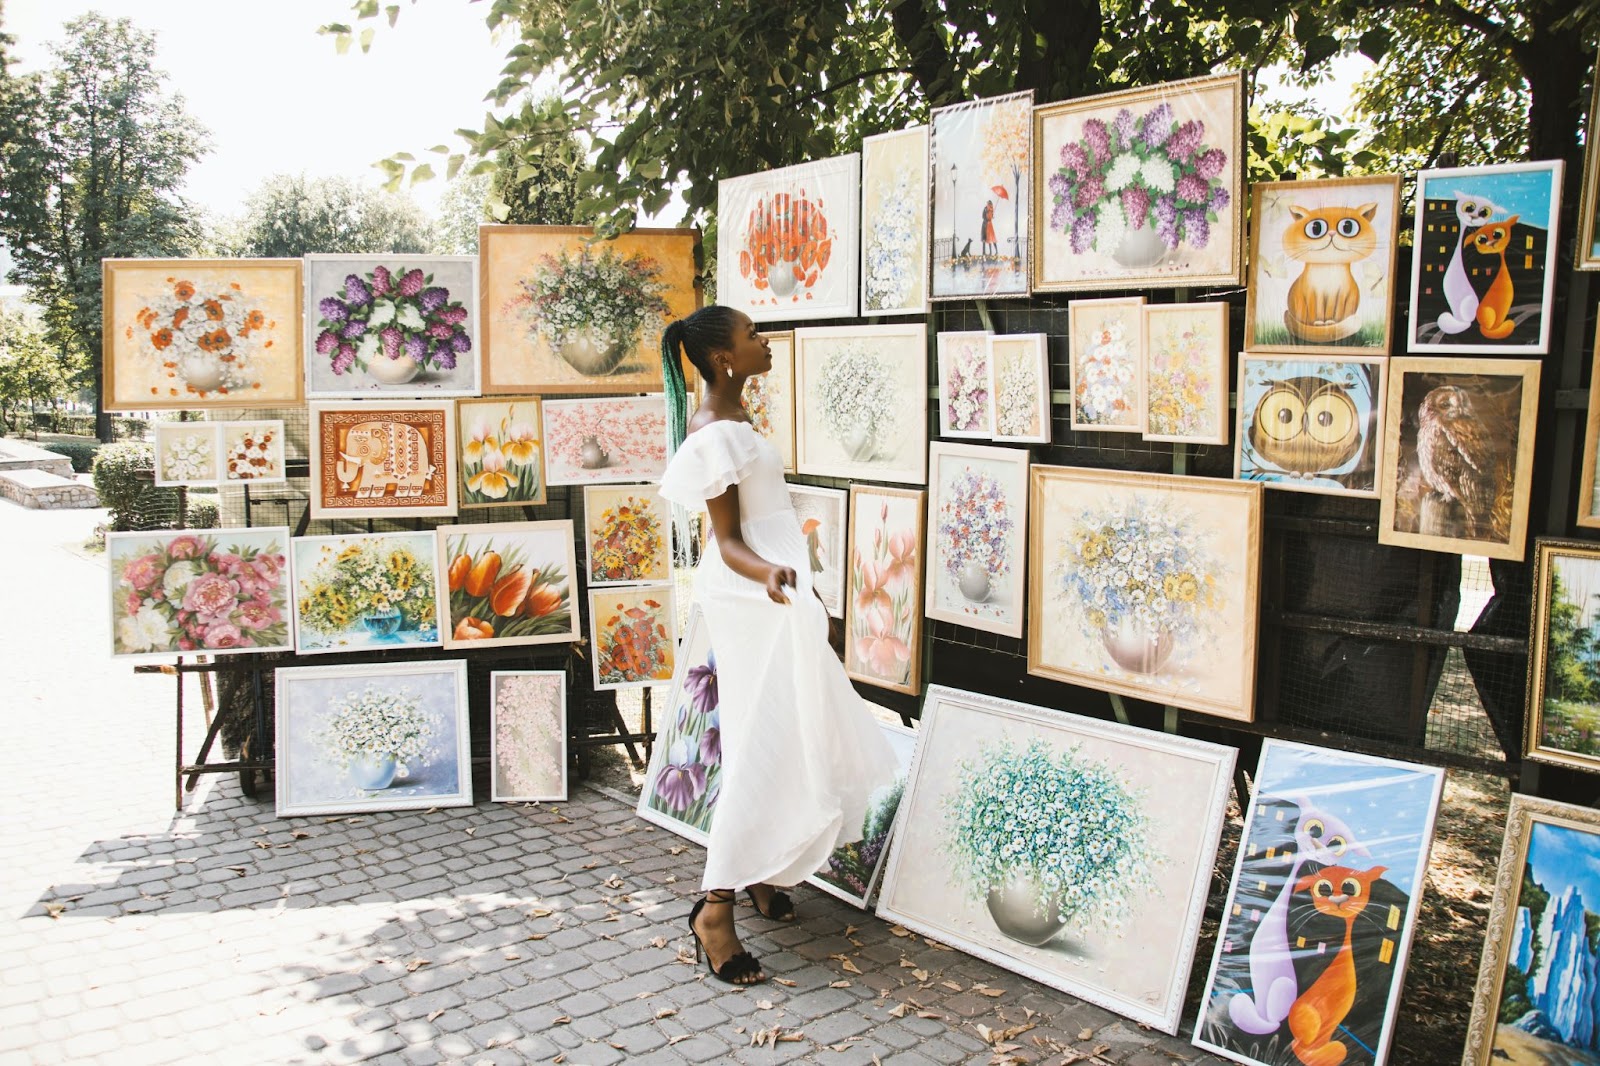 Woman in white looking at a range of artwork